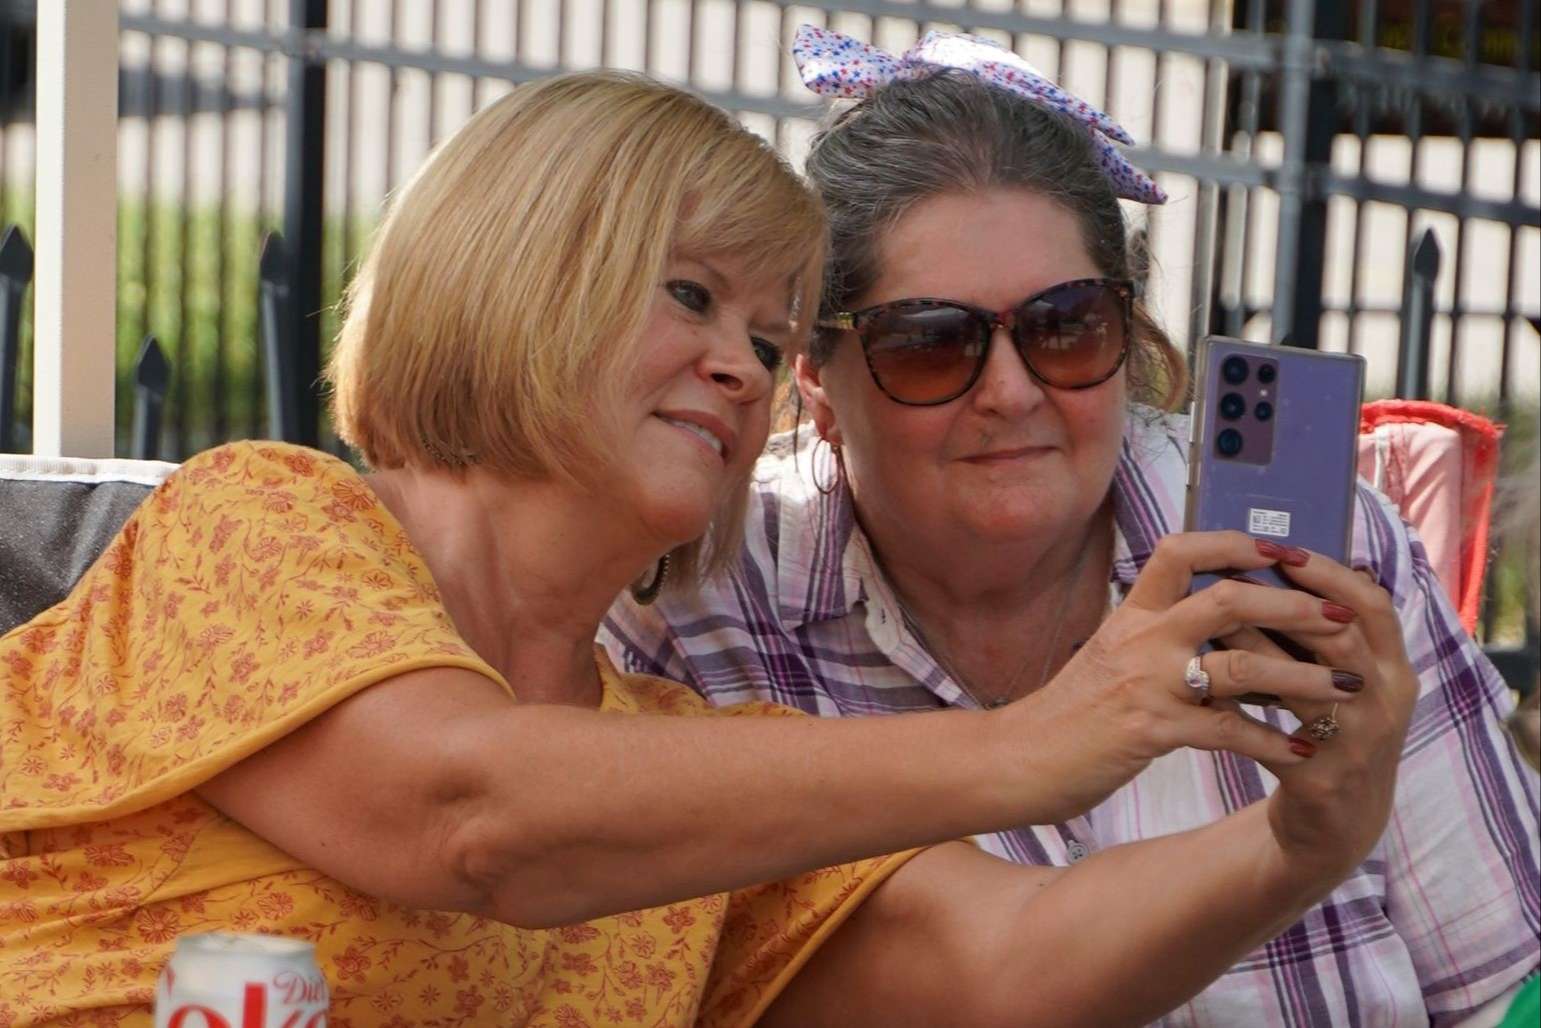 blond woman takes a phone selfie with a woman wearing sunglasses